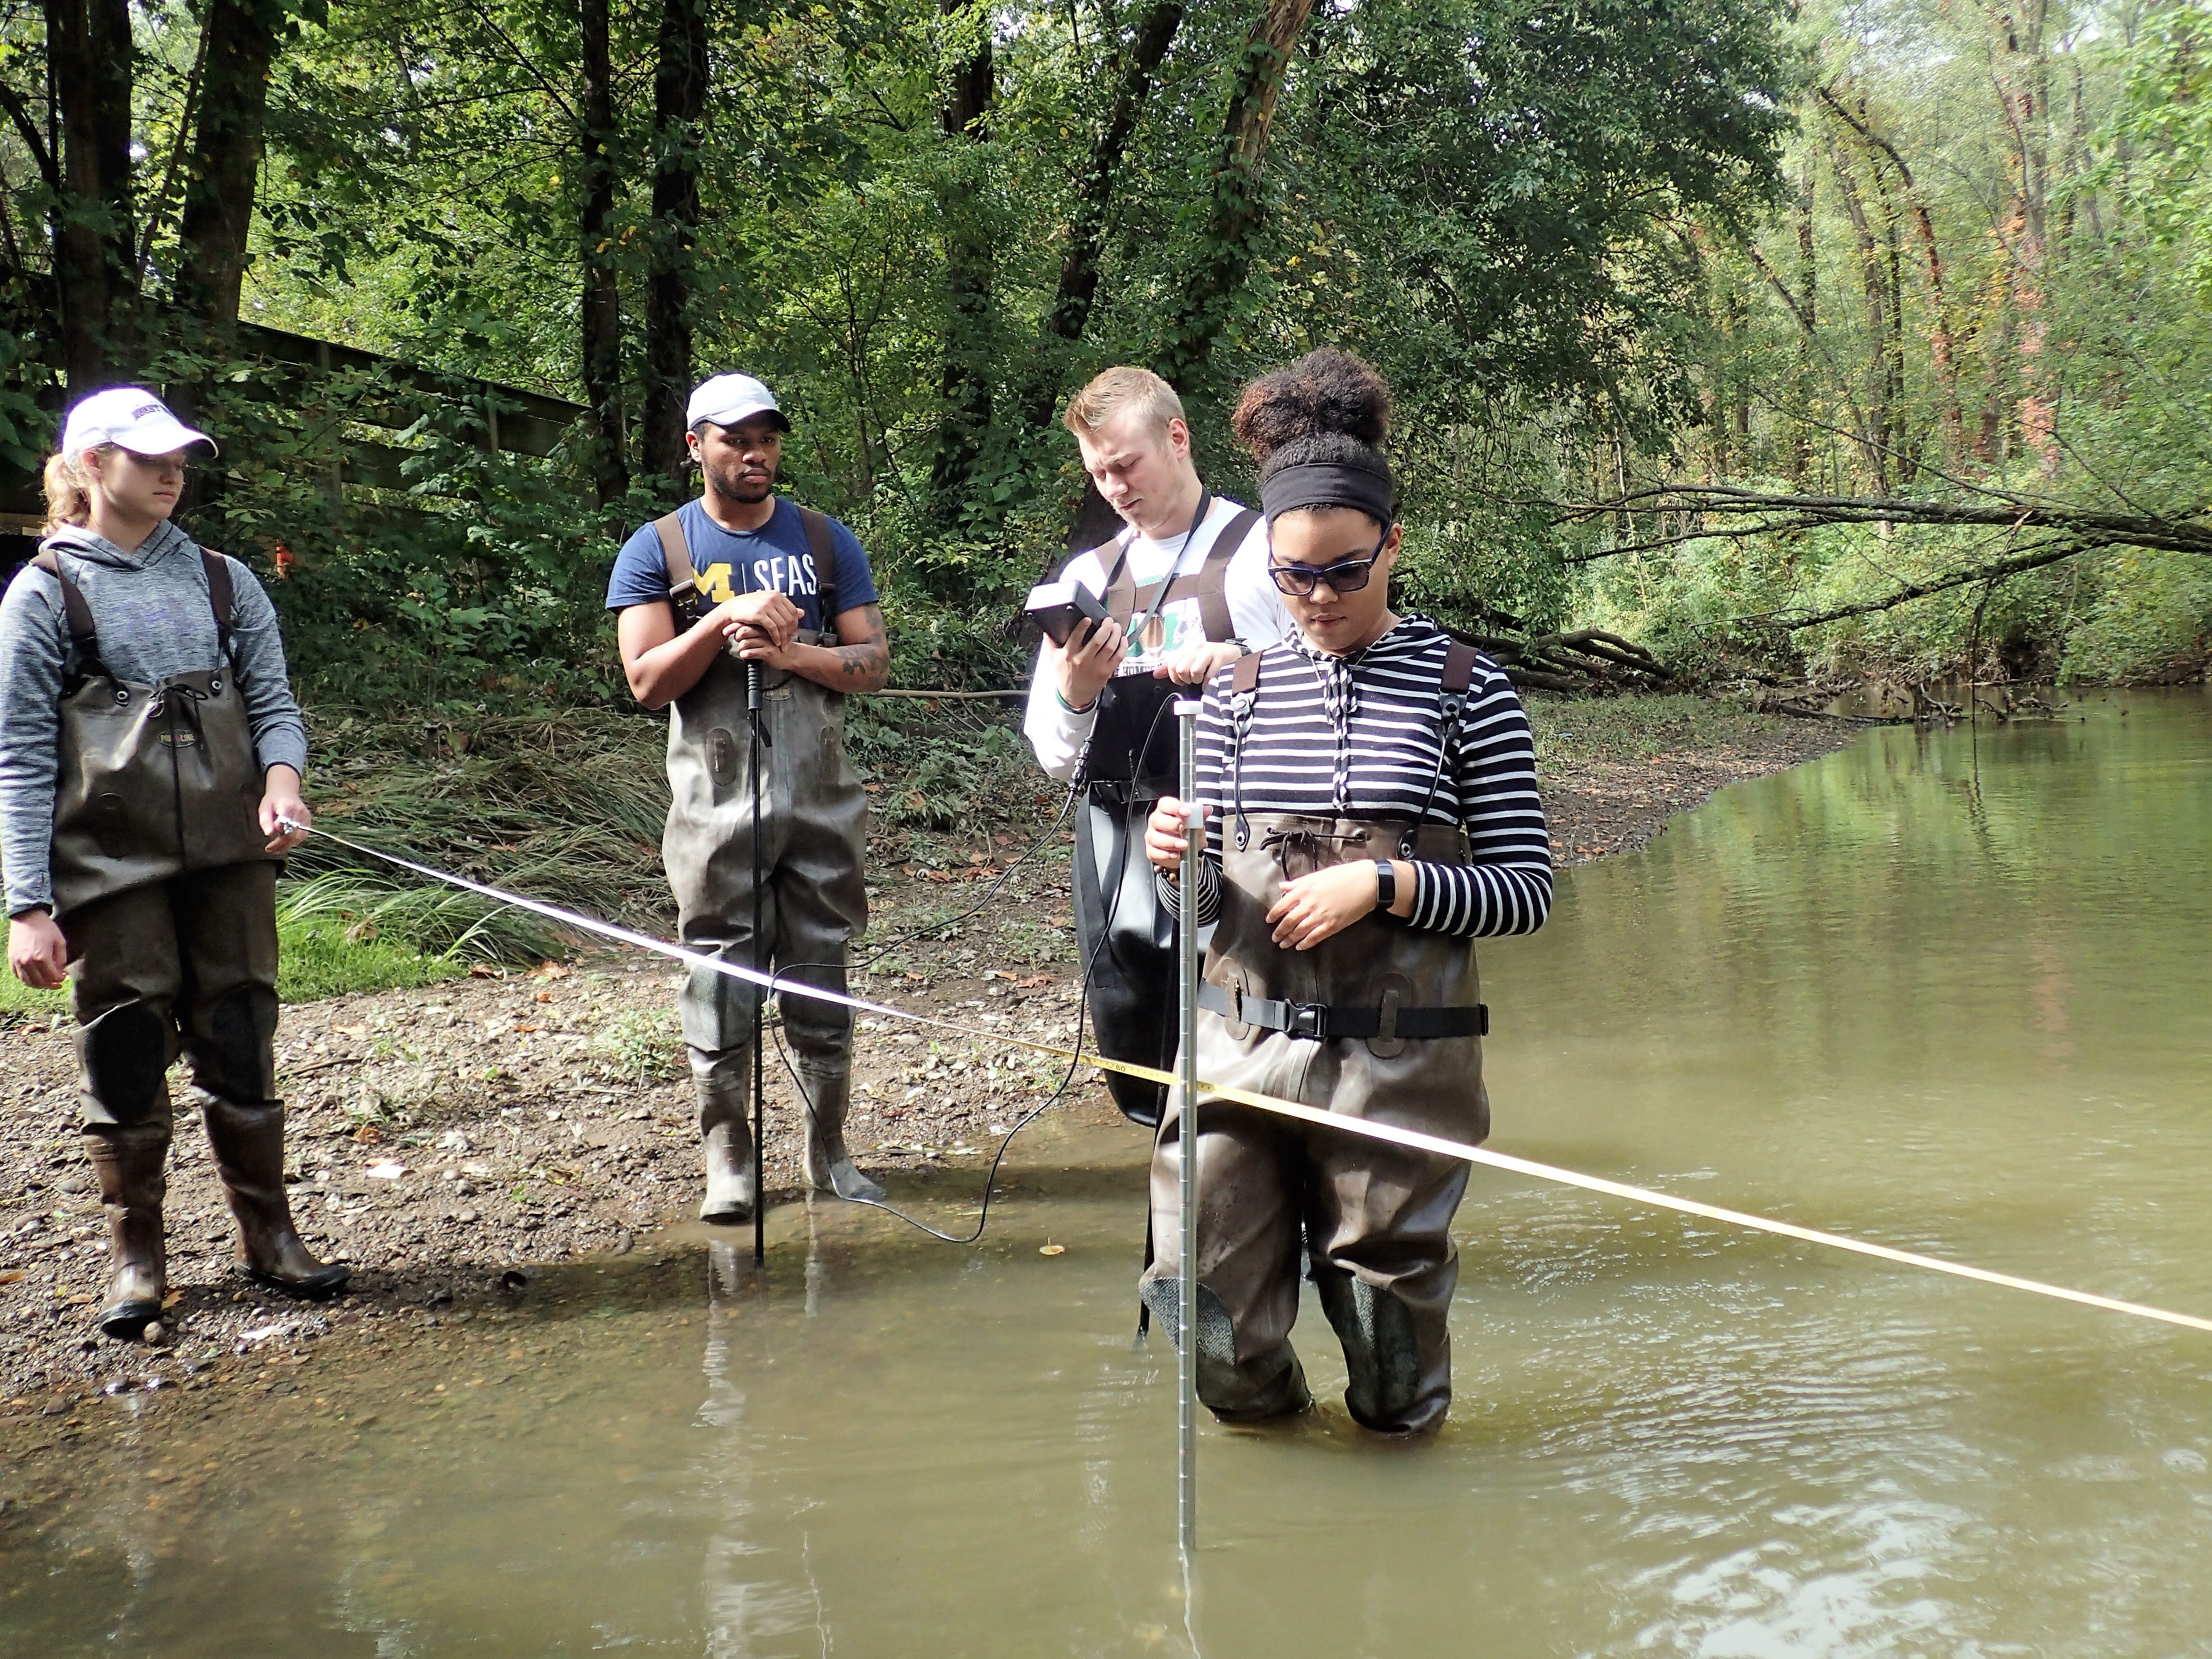 Four environmental science students wade in the water with a rope and measurement tools to evaluate river flow